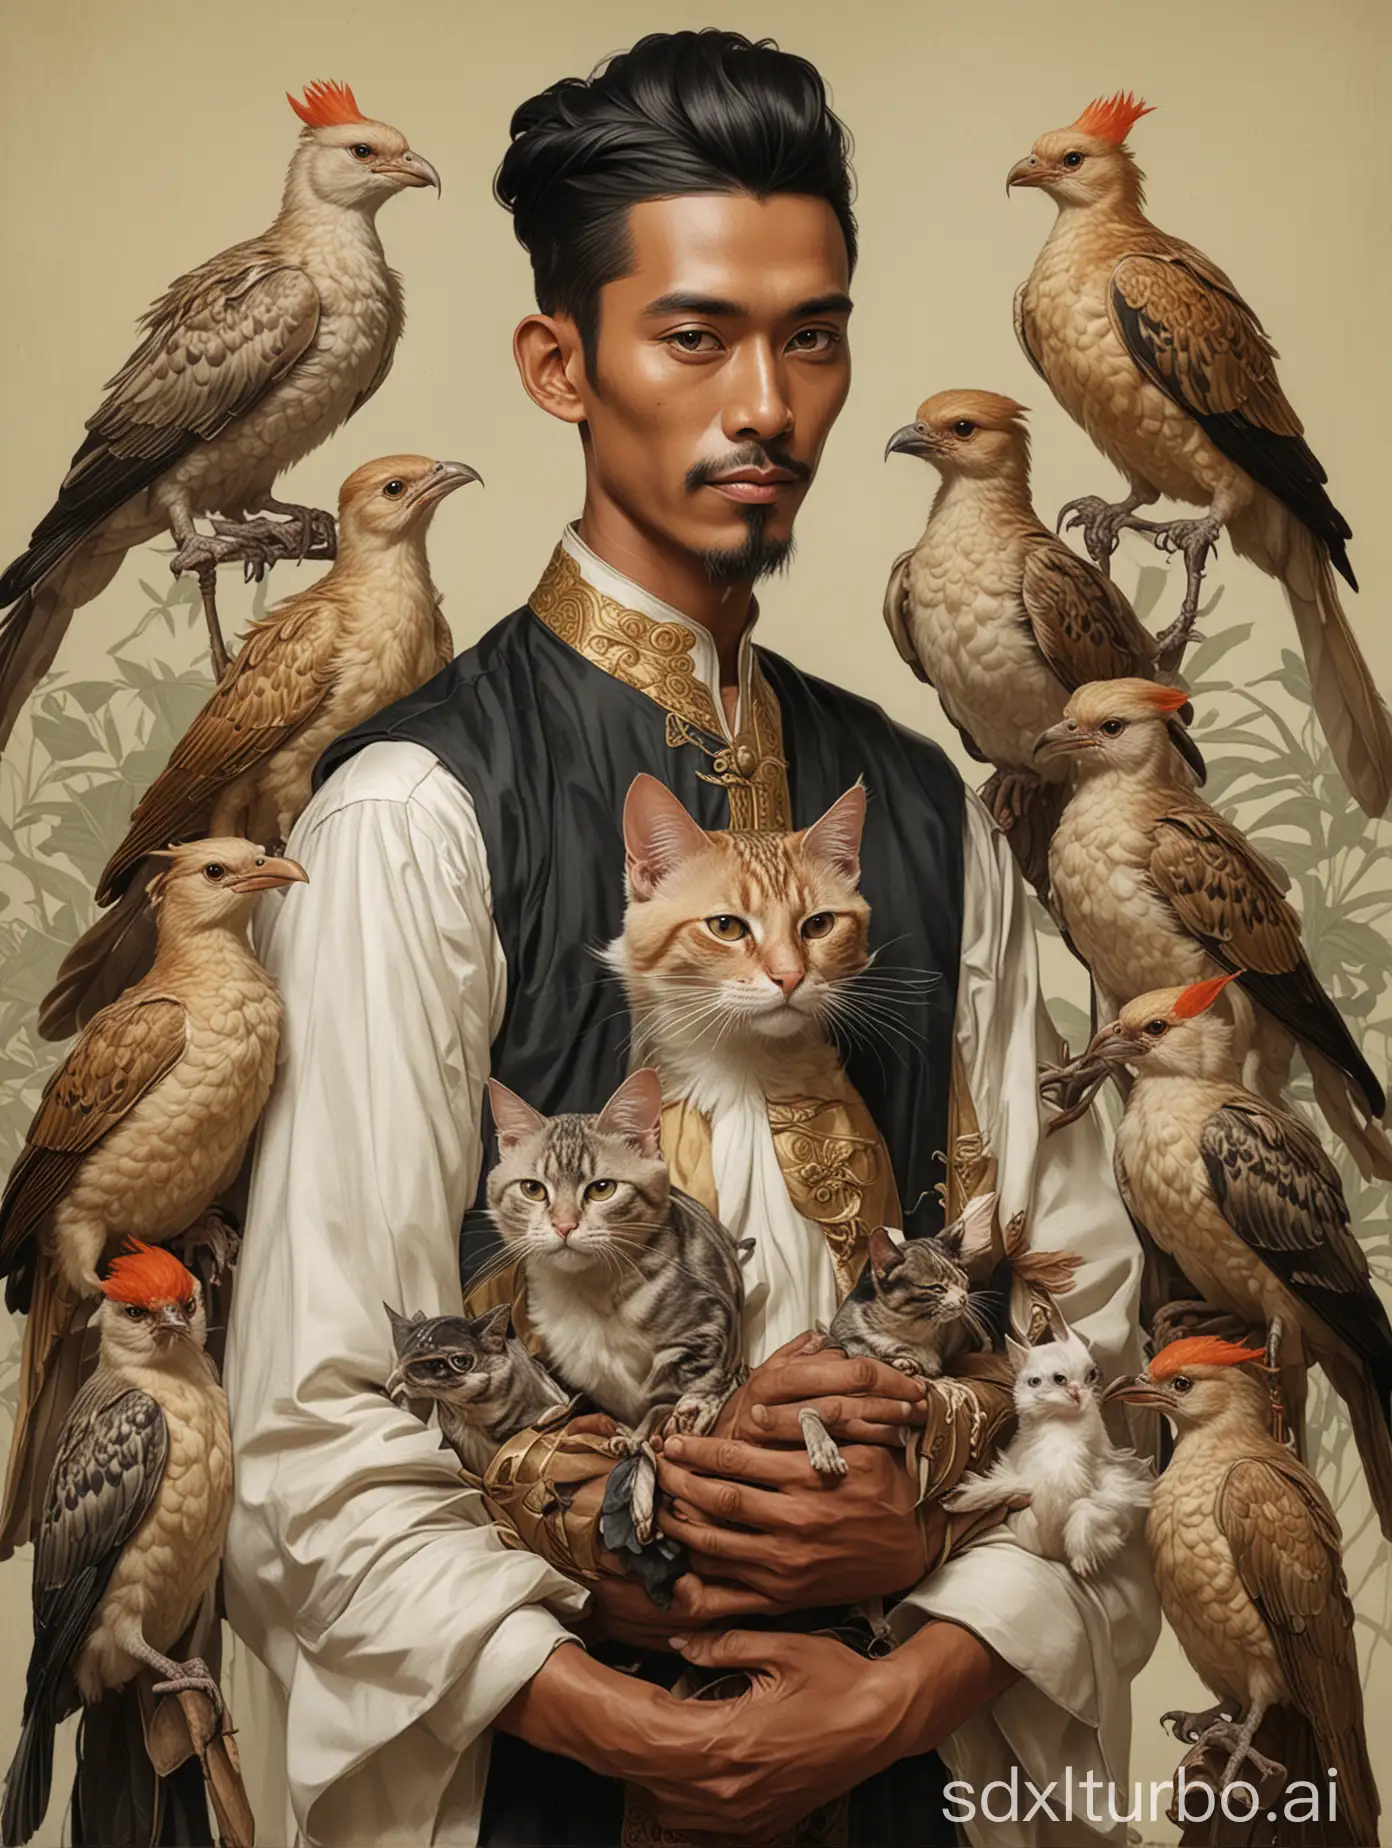 a group portrait of javanese men holding various birds-cat hybrid pets for a movie in Leyendecker illustration style